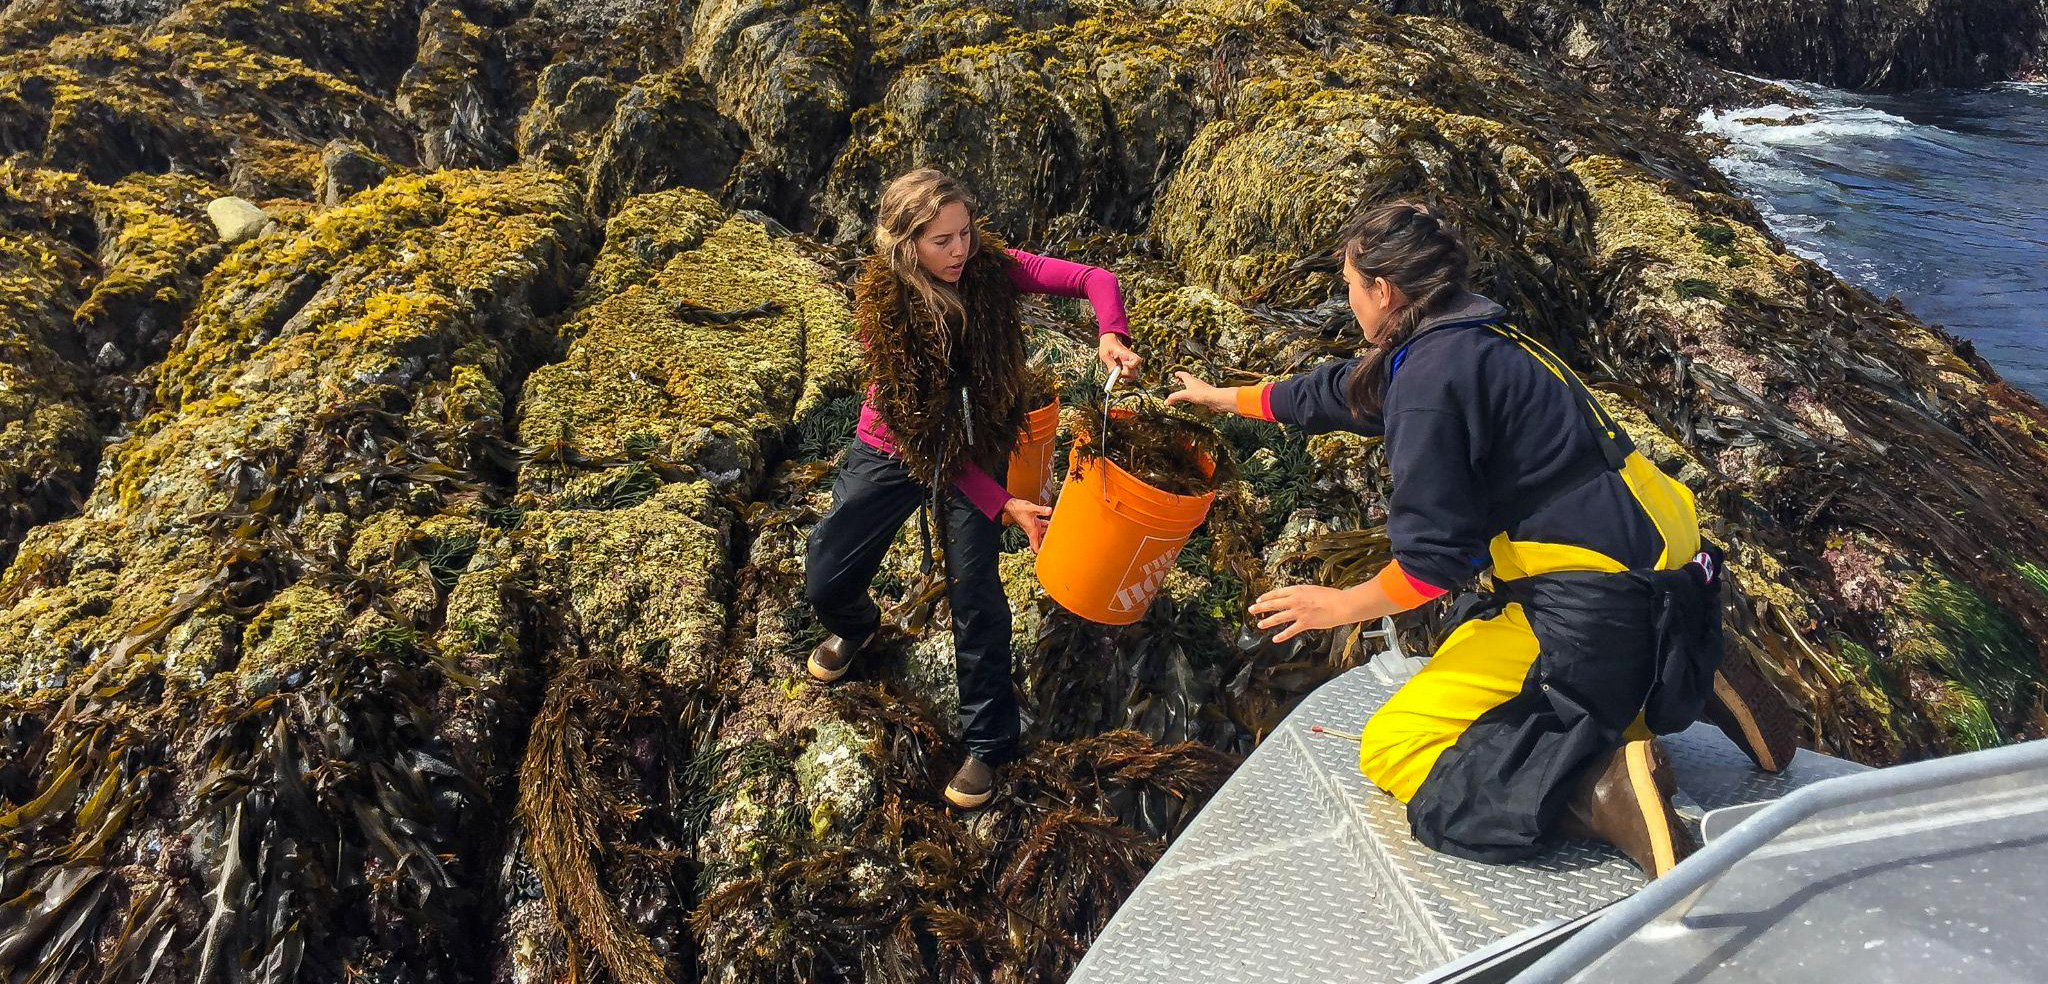 Two women passing a bucket of seaweed to eachother.